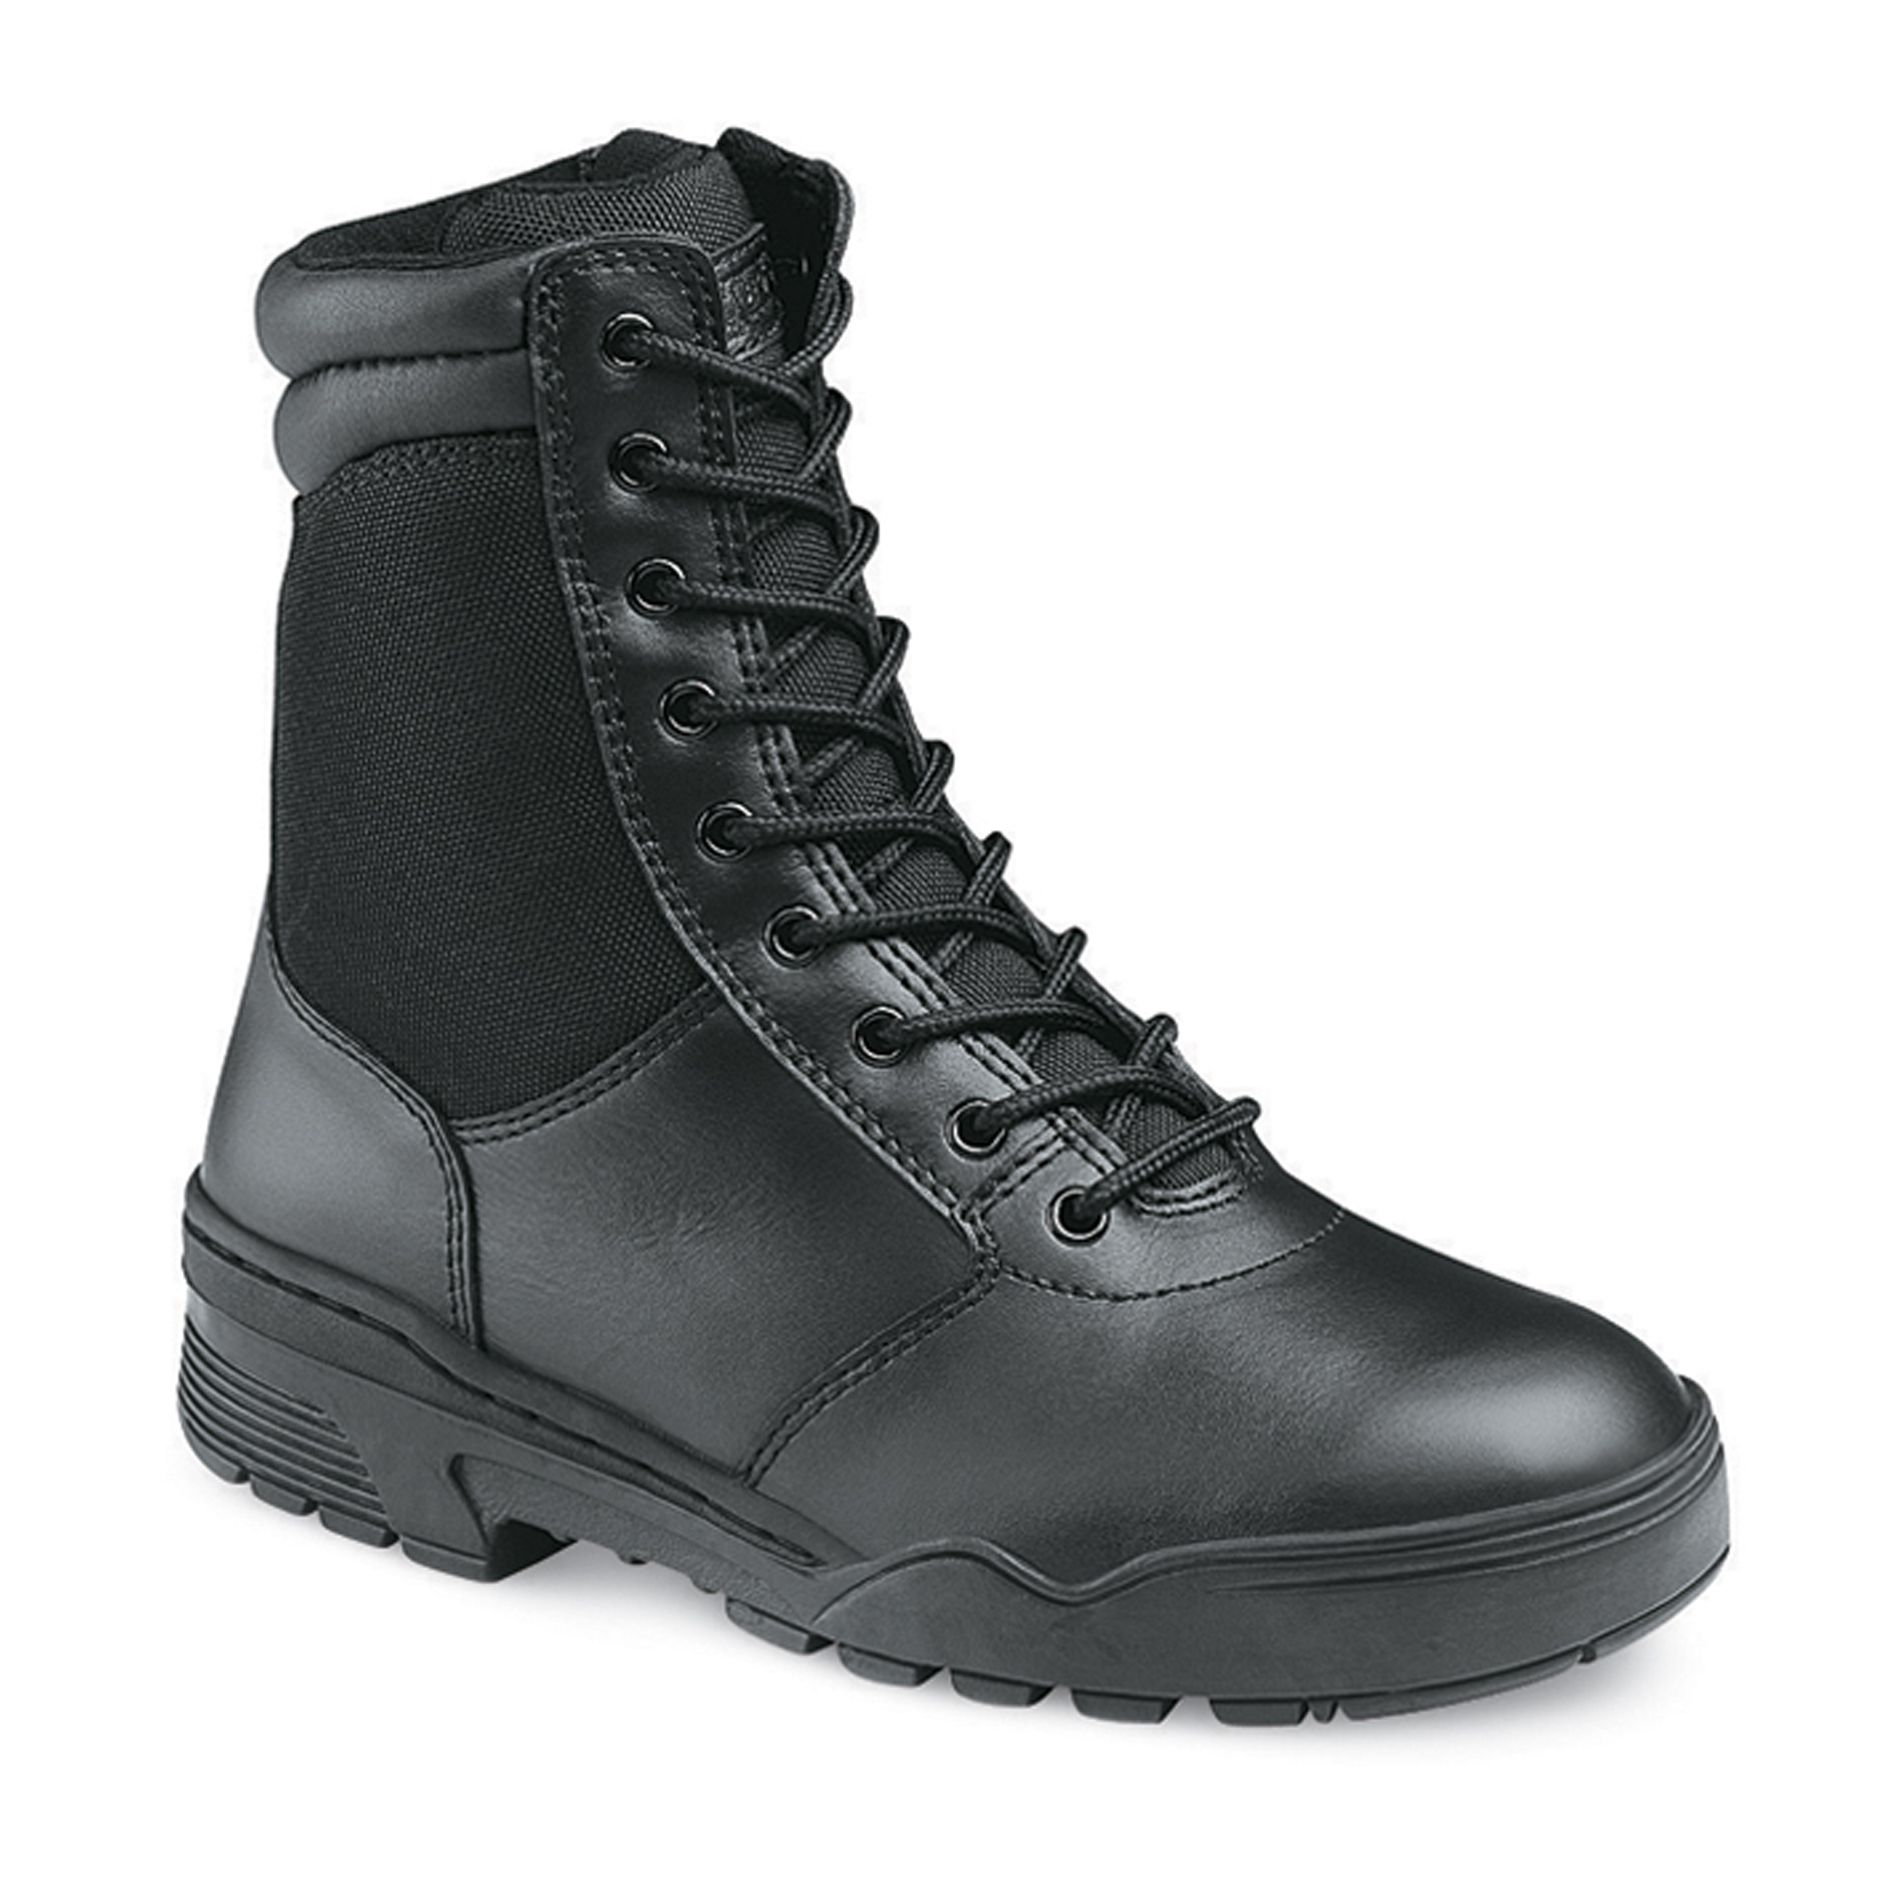 Men's Work Boots Steel Toe Leather8" Black 85492 Wide Avail